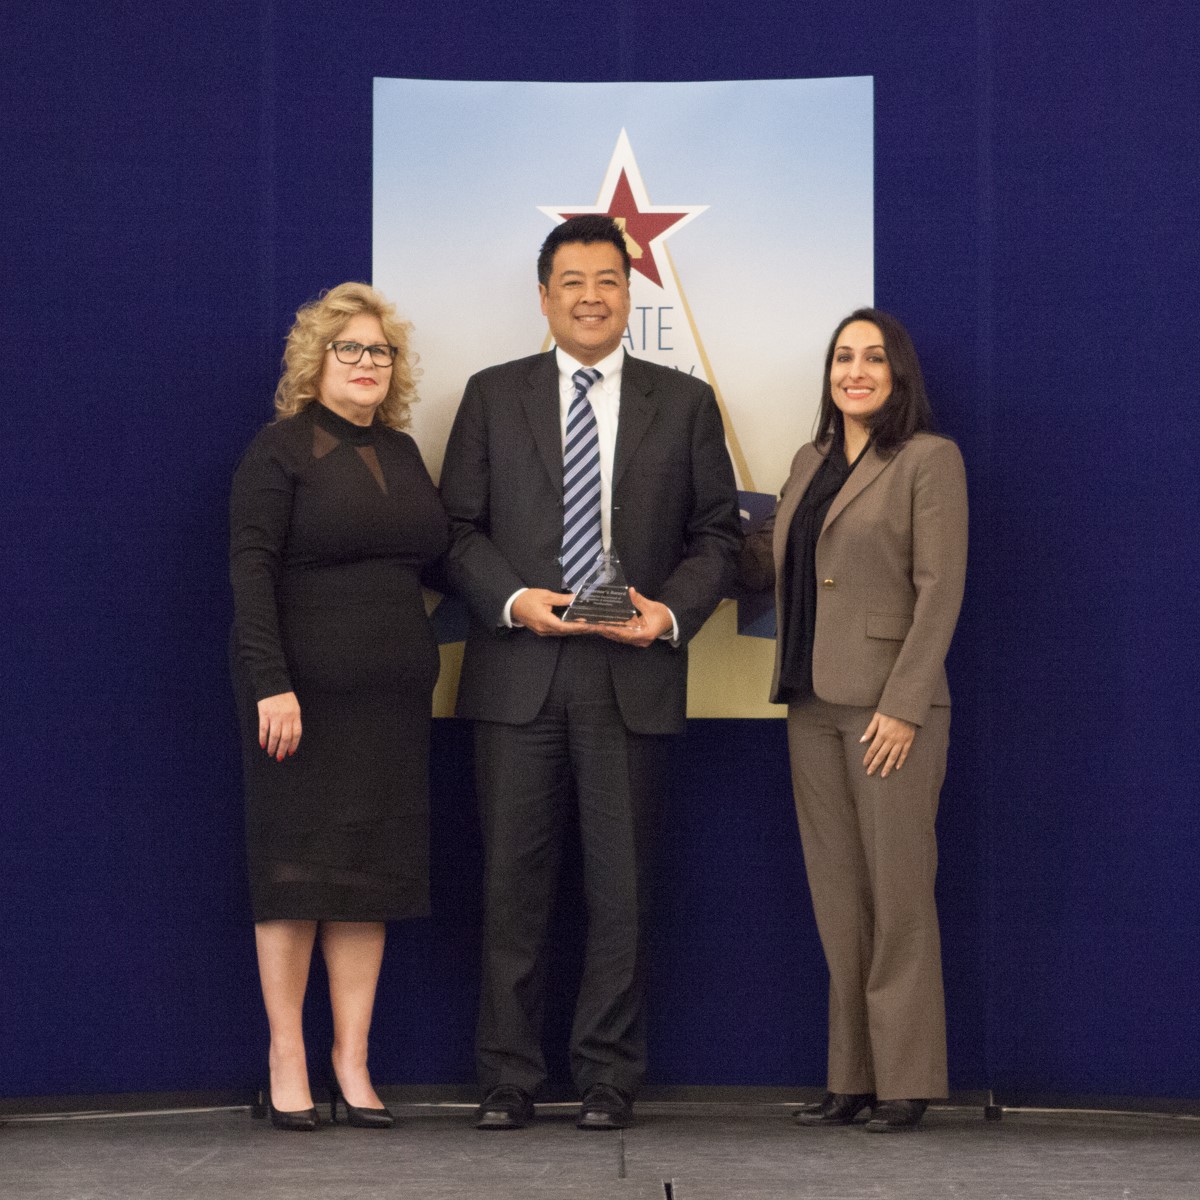 Nina Martinez and David Fong accept the Governor's Award for the California Department of Corrections and Rehabilitation Headquarters, Presented by Maral Farsi, Deputy Director of Legislative and Inter-Governmental Affairs, Governor's Office of Business and Economic Development.